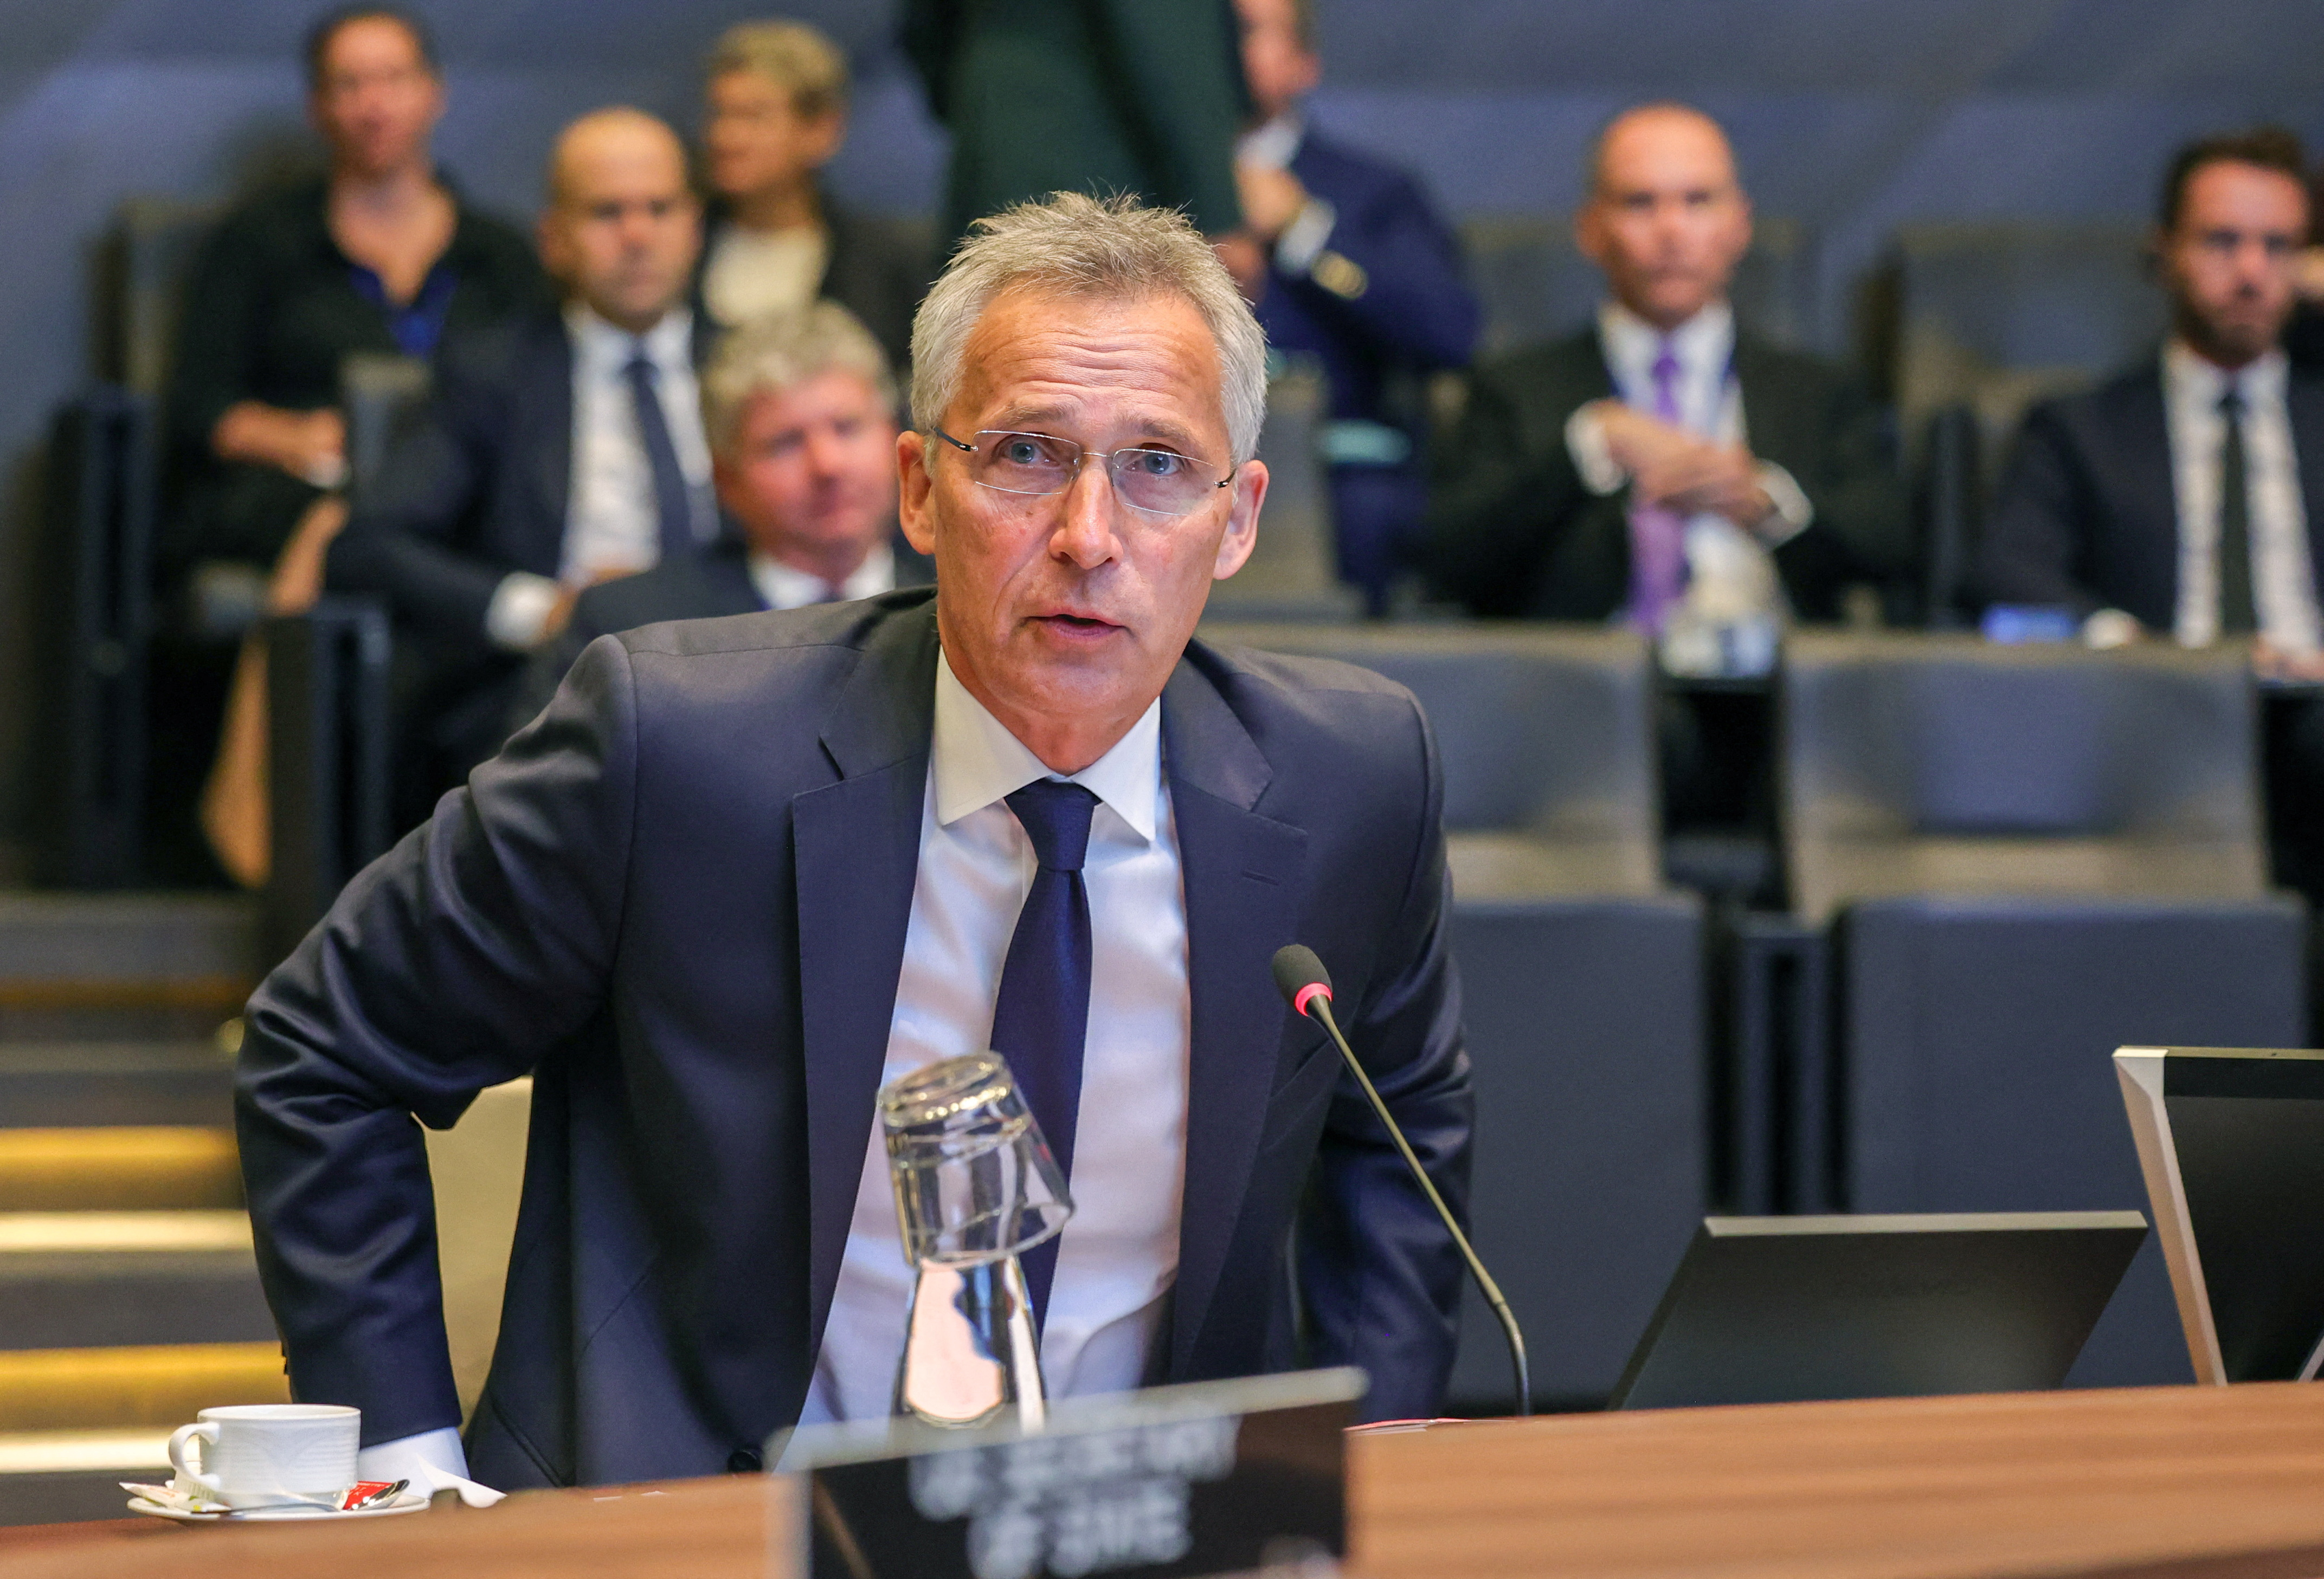 NATO ambassadors' meeting in Brussels